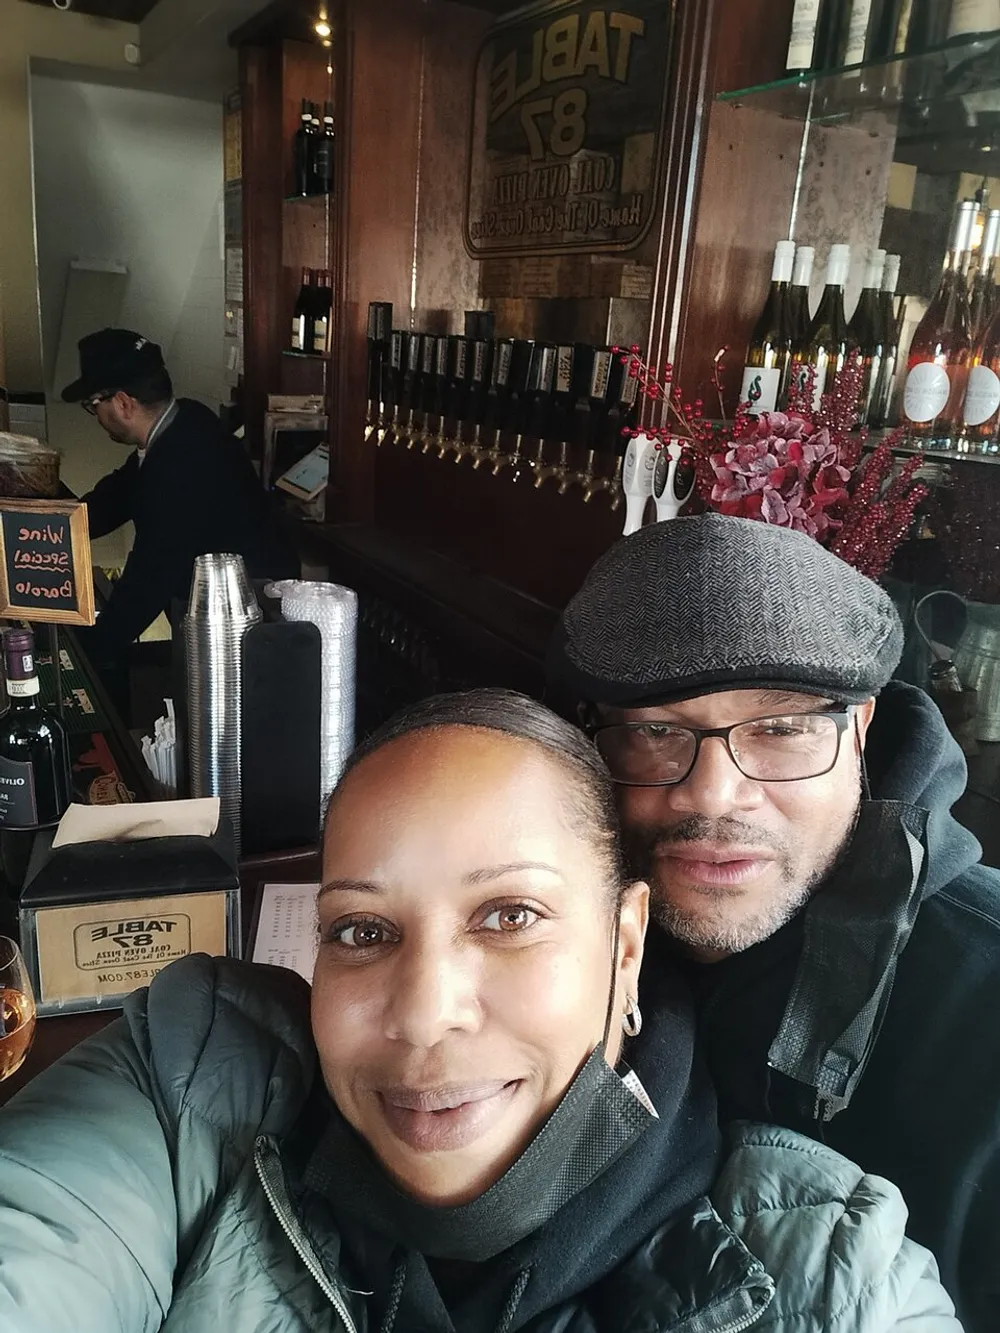 A man and a woman are taking a selfie together with a cozy bar setting in the background